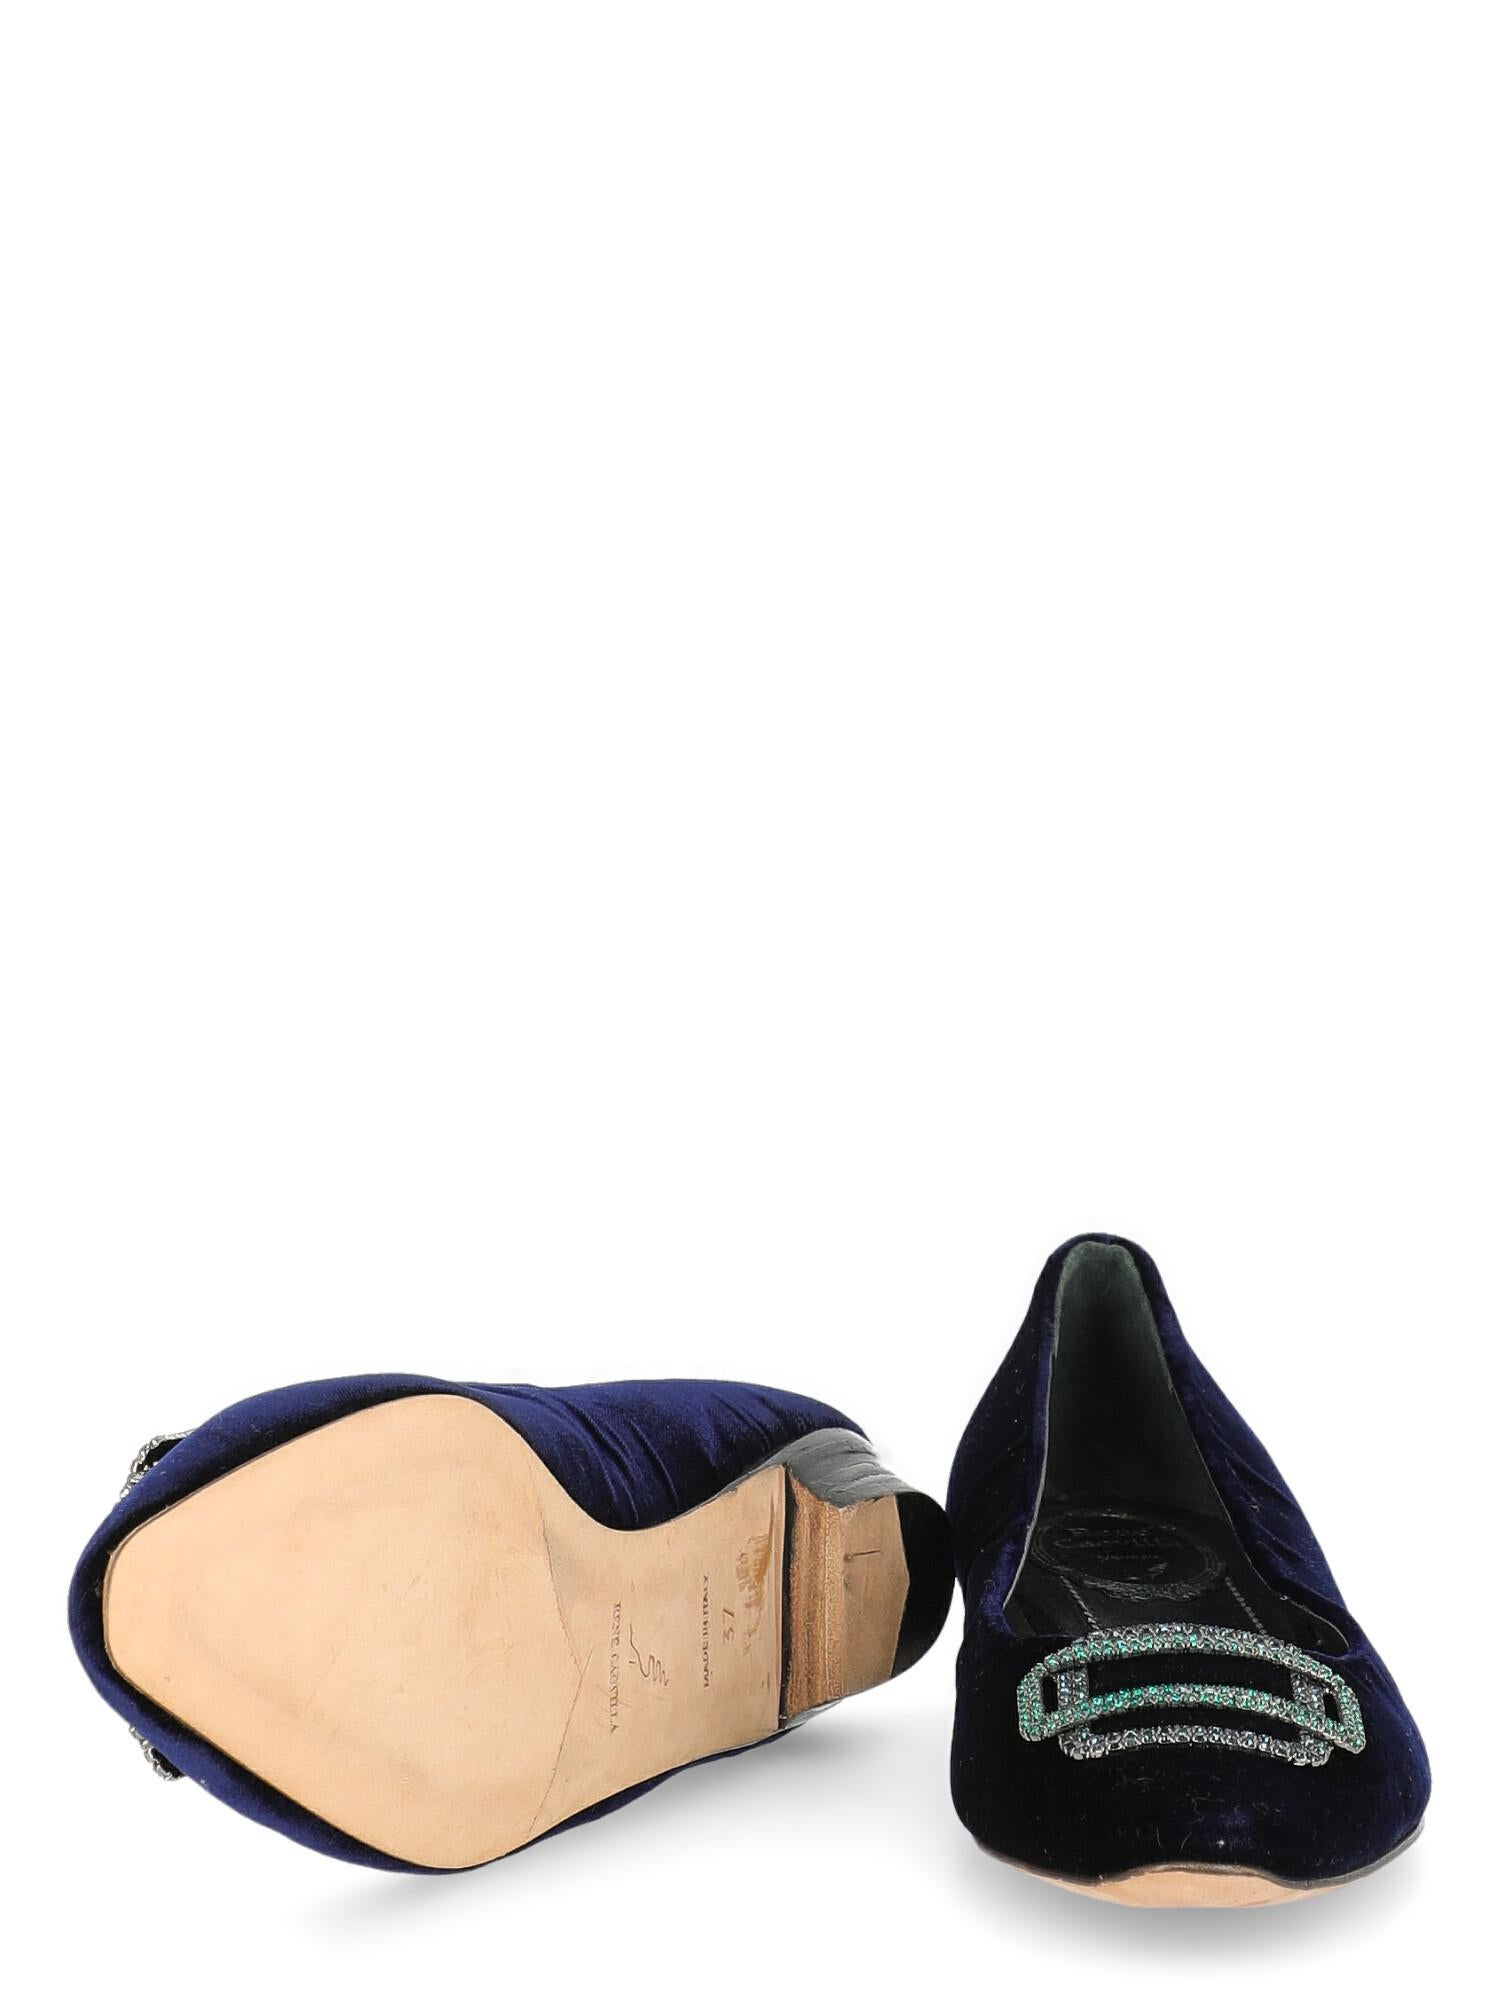 Rene Caovilla  Women   Ballet flats  Navy Fabric EU 37 In Good Condition For Sale In Milan, IT